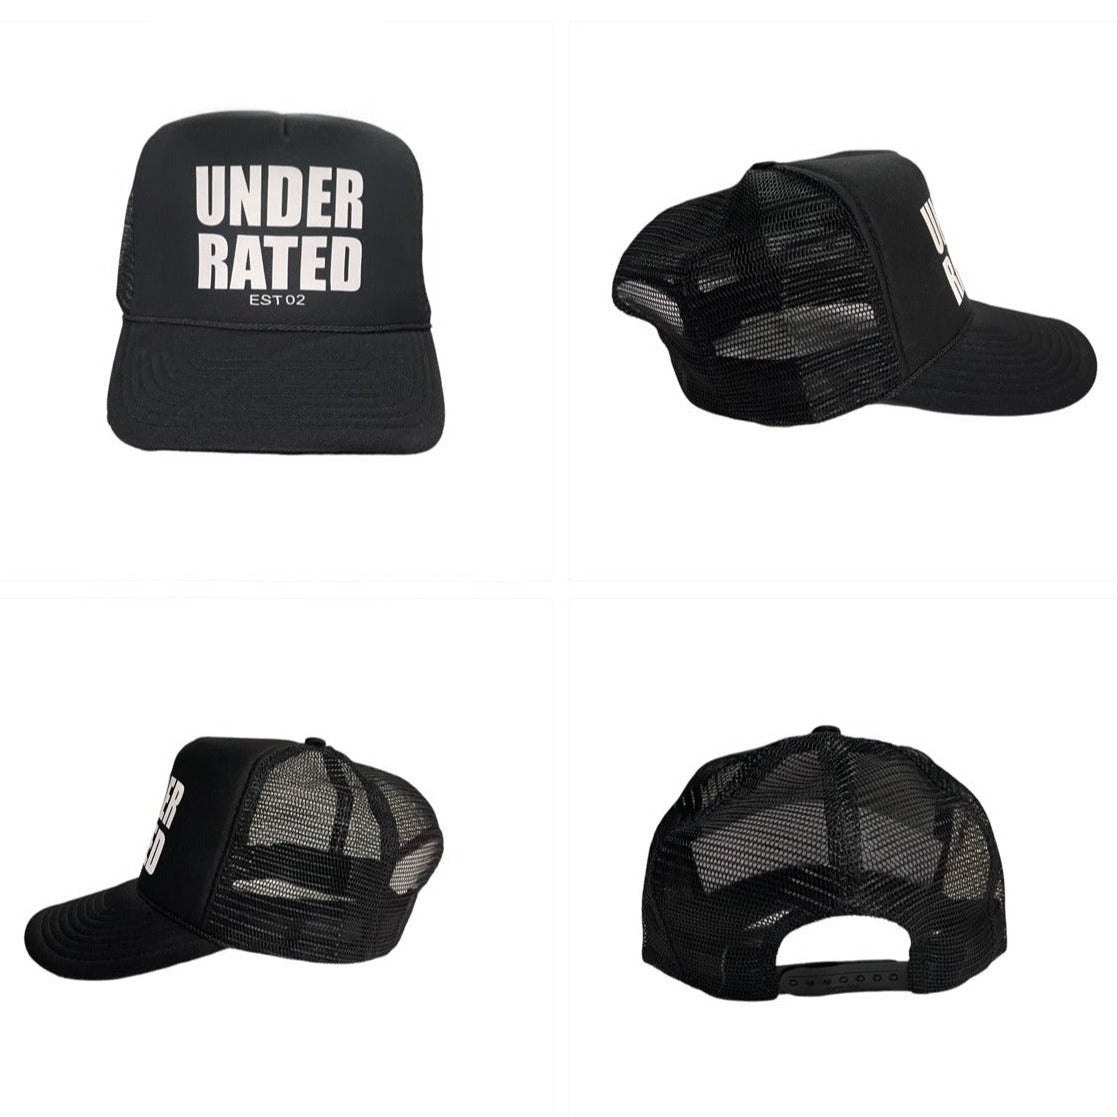 BLACK TRUCKER HAT WITH WHITE FONT